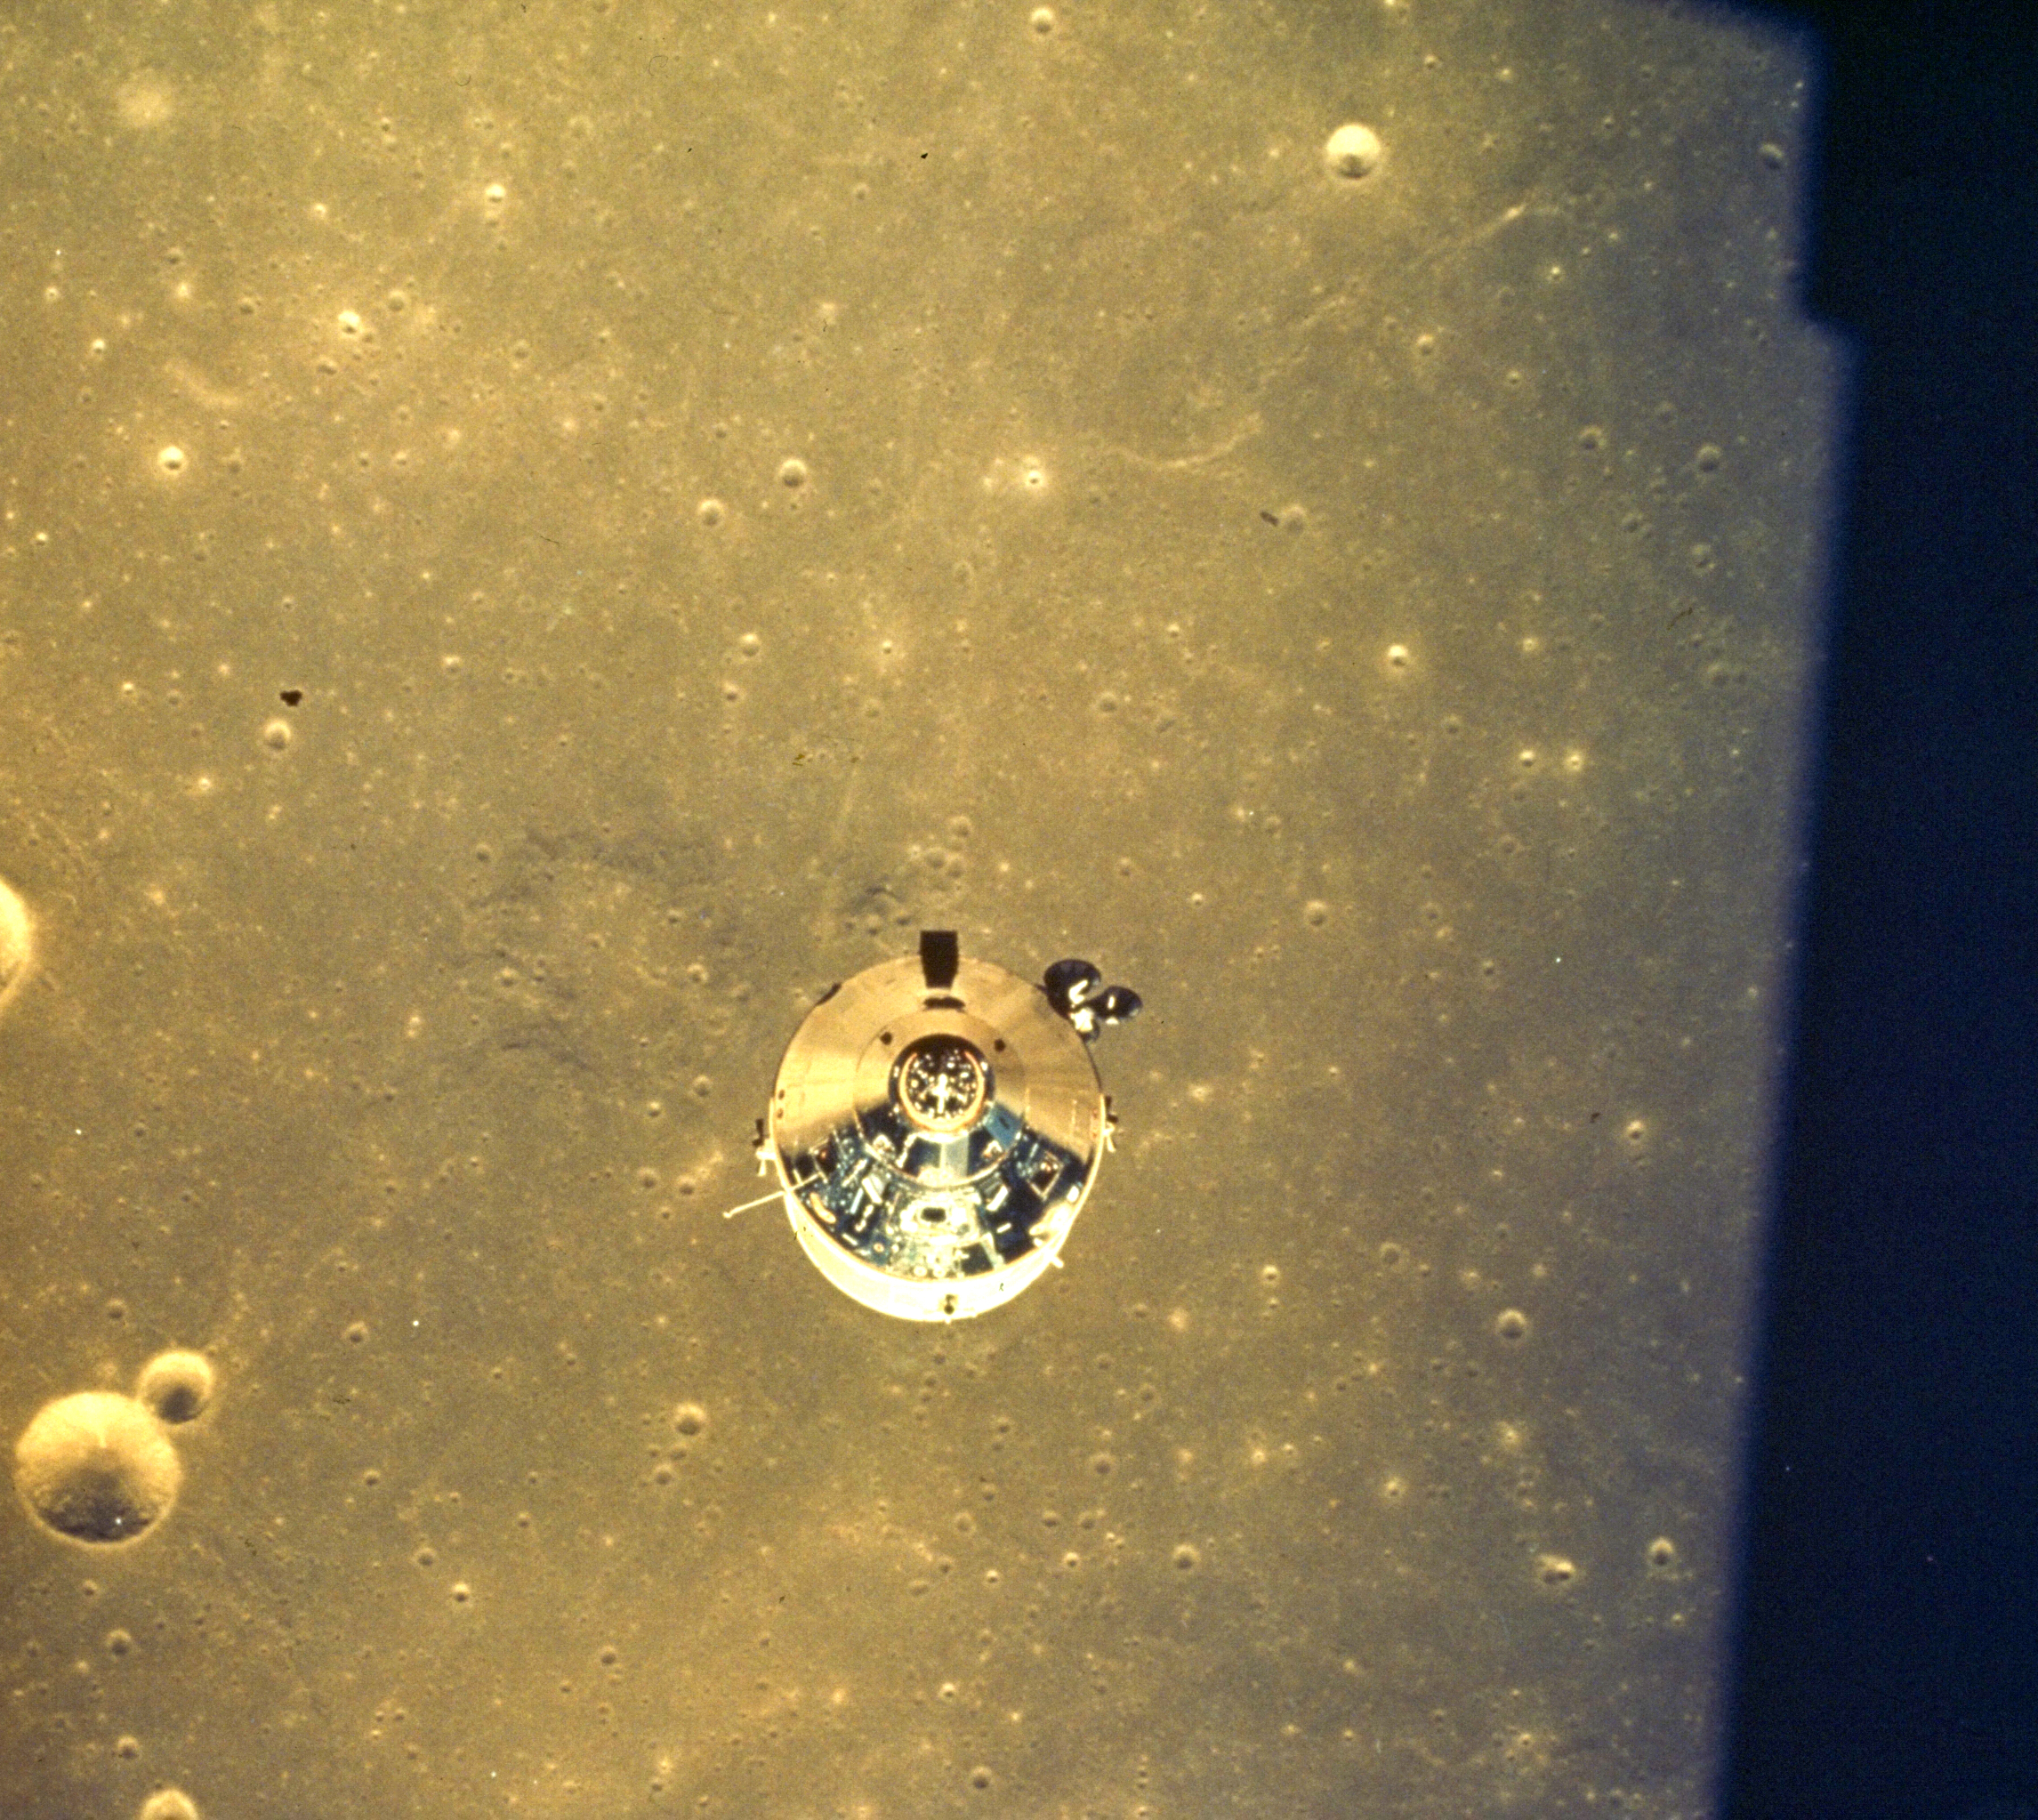 The Apollo 11 space module above the surface of the moon. Image: Hulton Archive / Getty Images